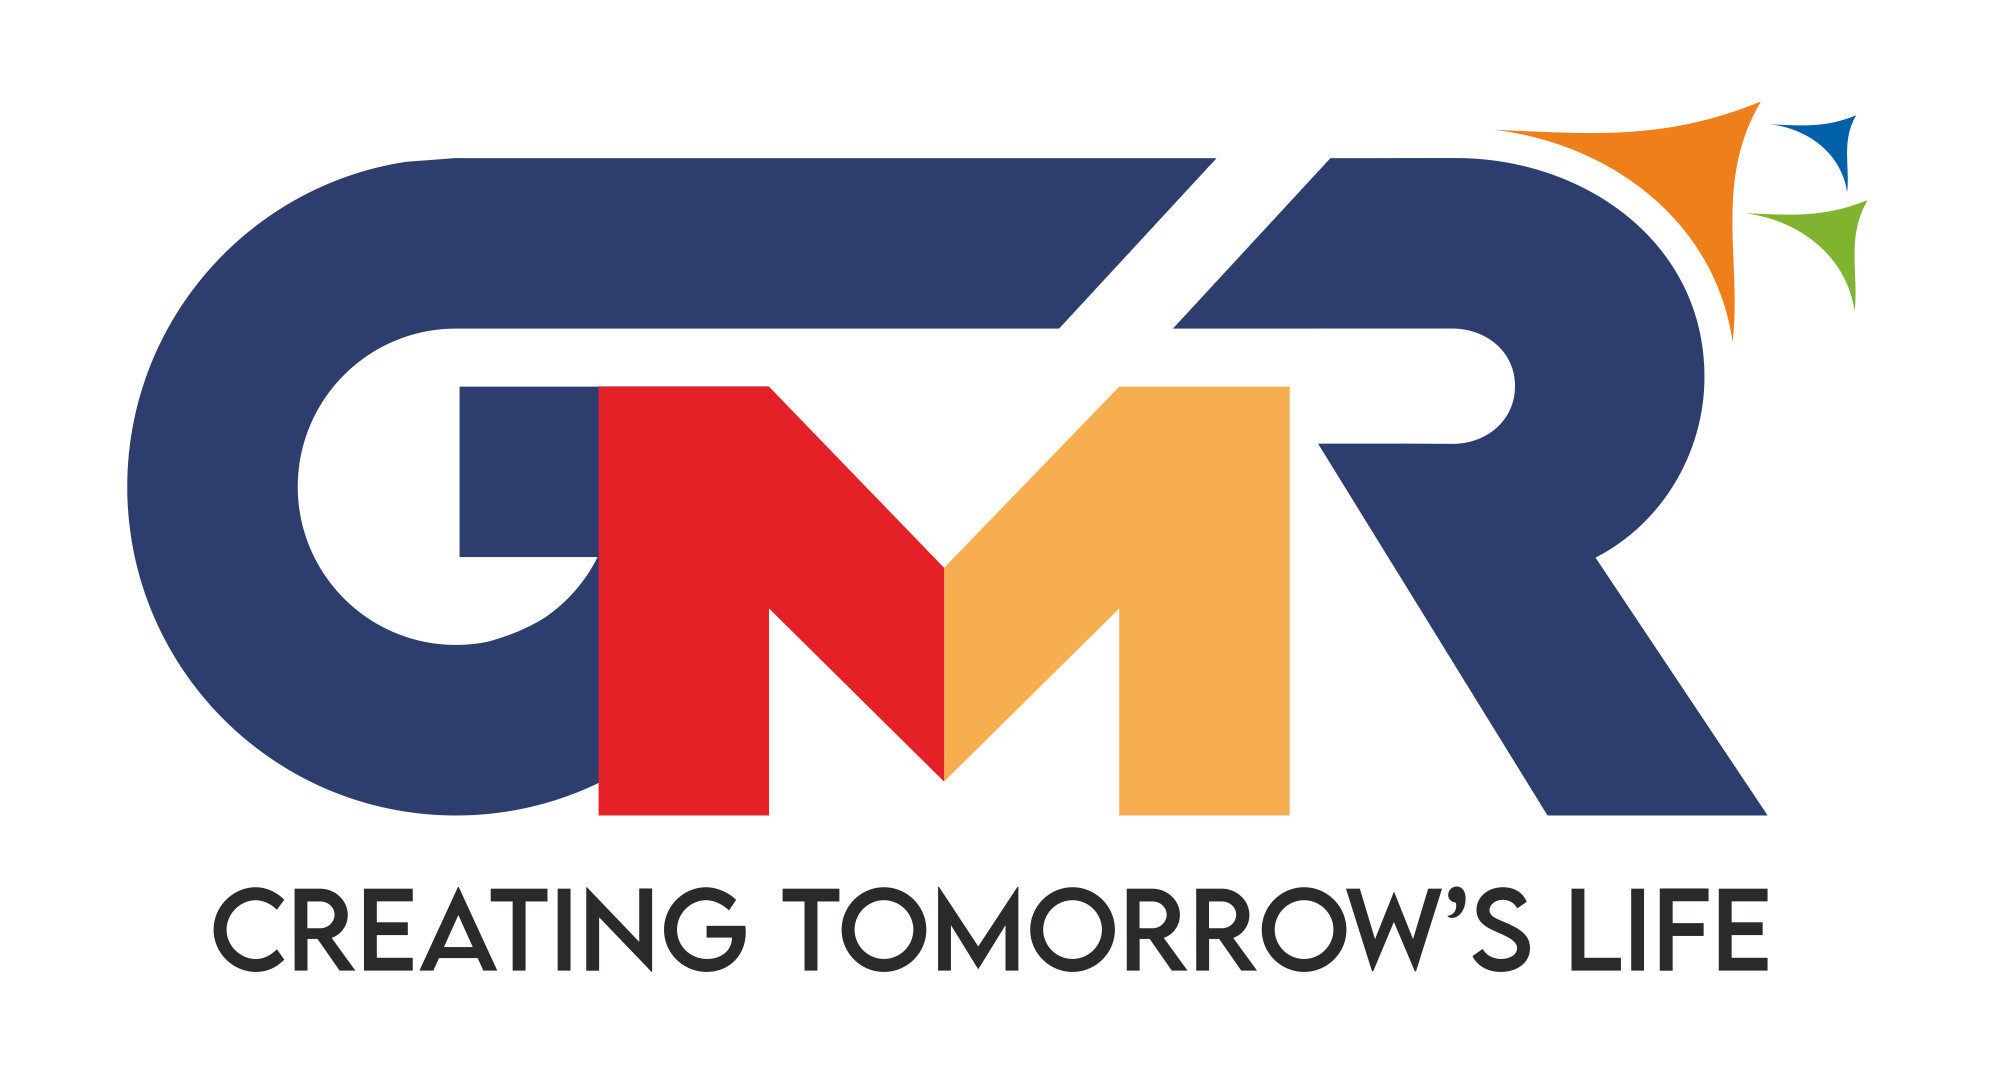 GMR Group - One of nation's best Infrastructure Companies